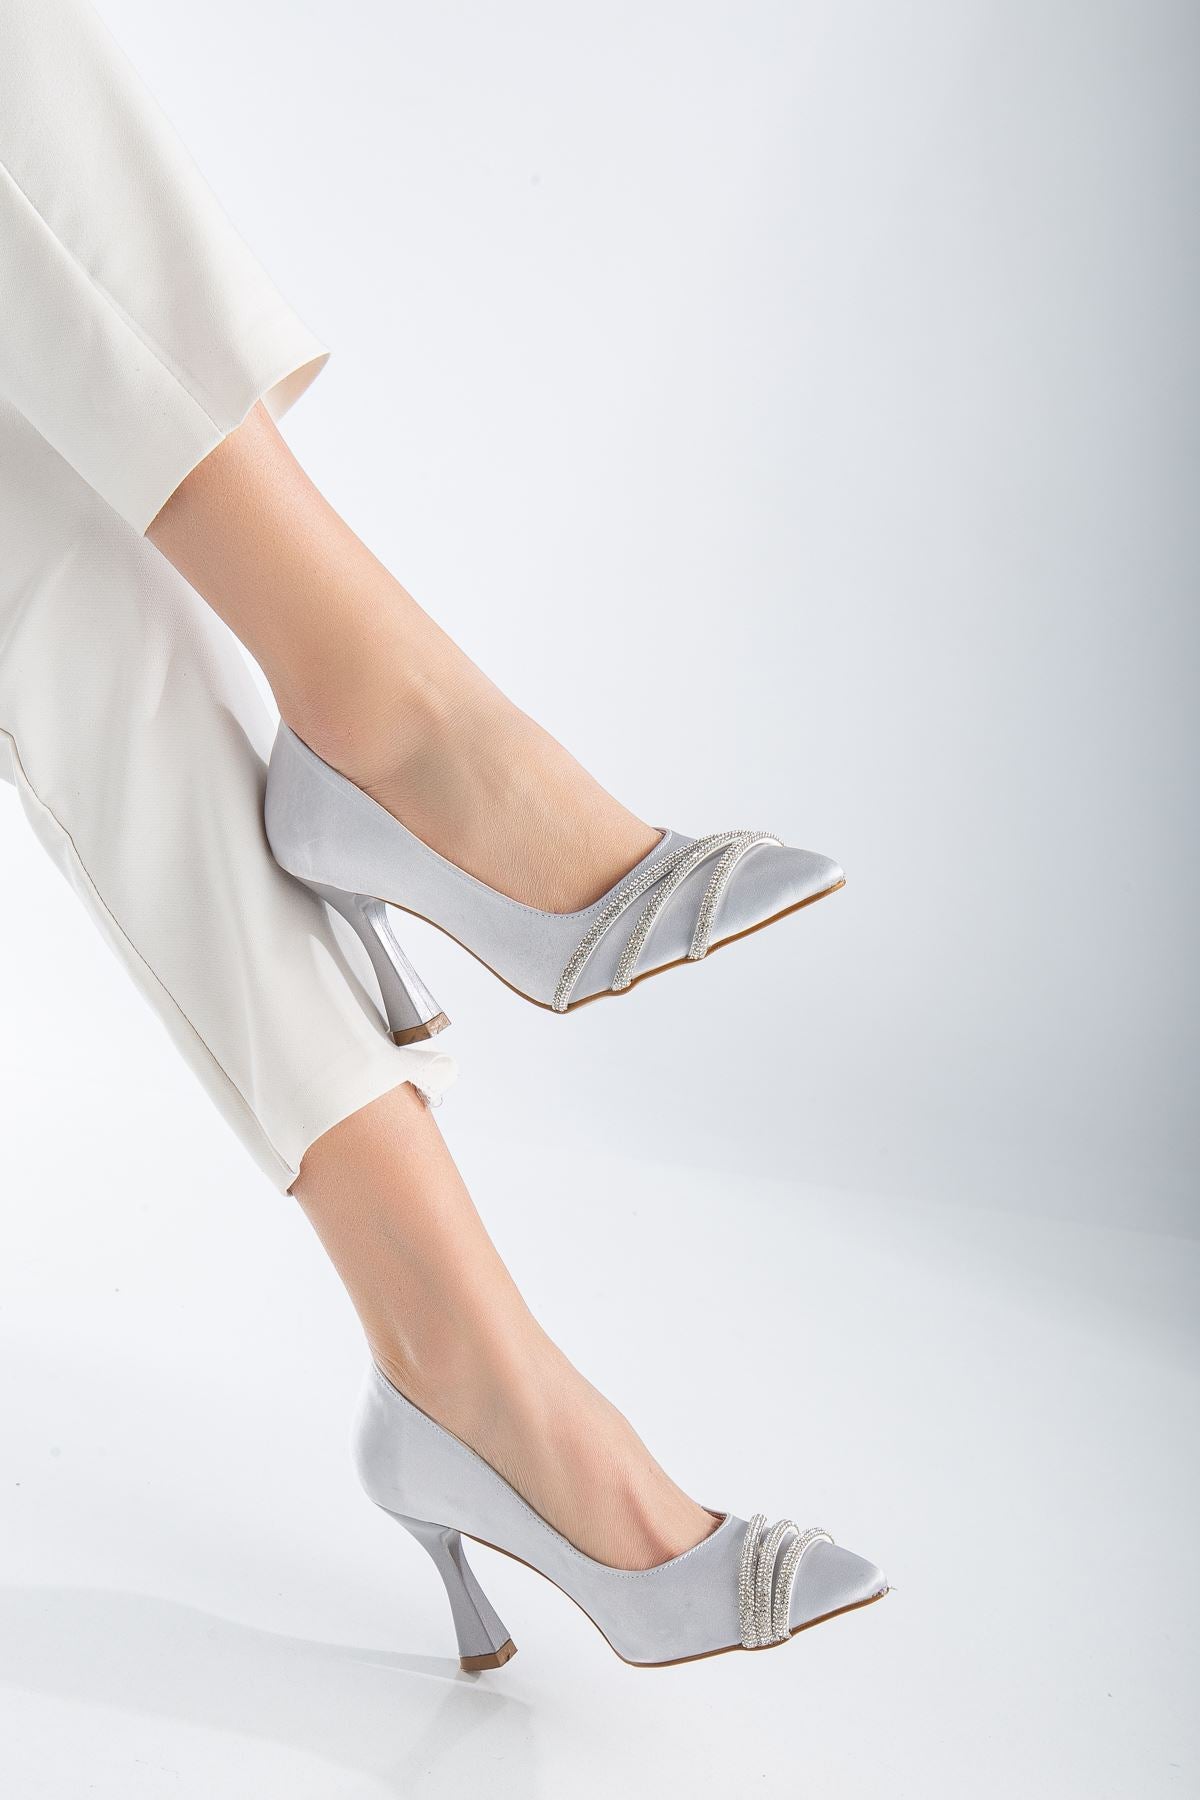 Women's Sayna Silver Satin Patterned Stone Detailed Pointed Toe Heeled Shoes - STREETMODE™